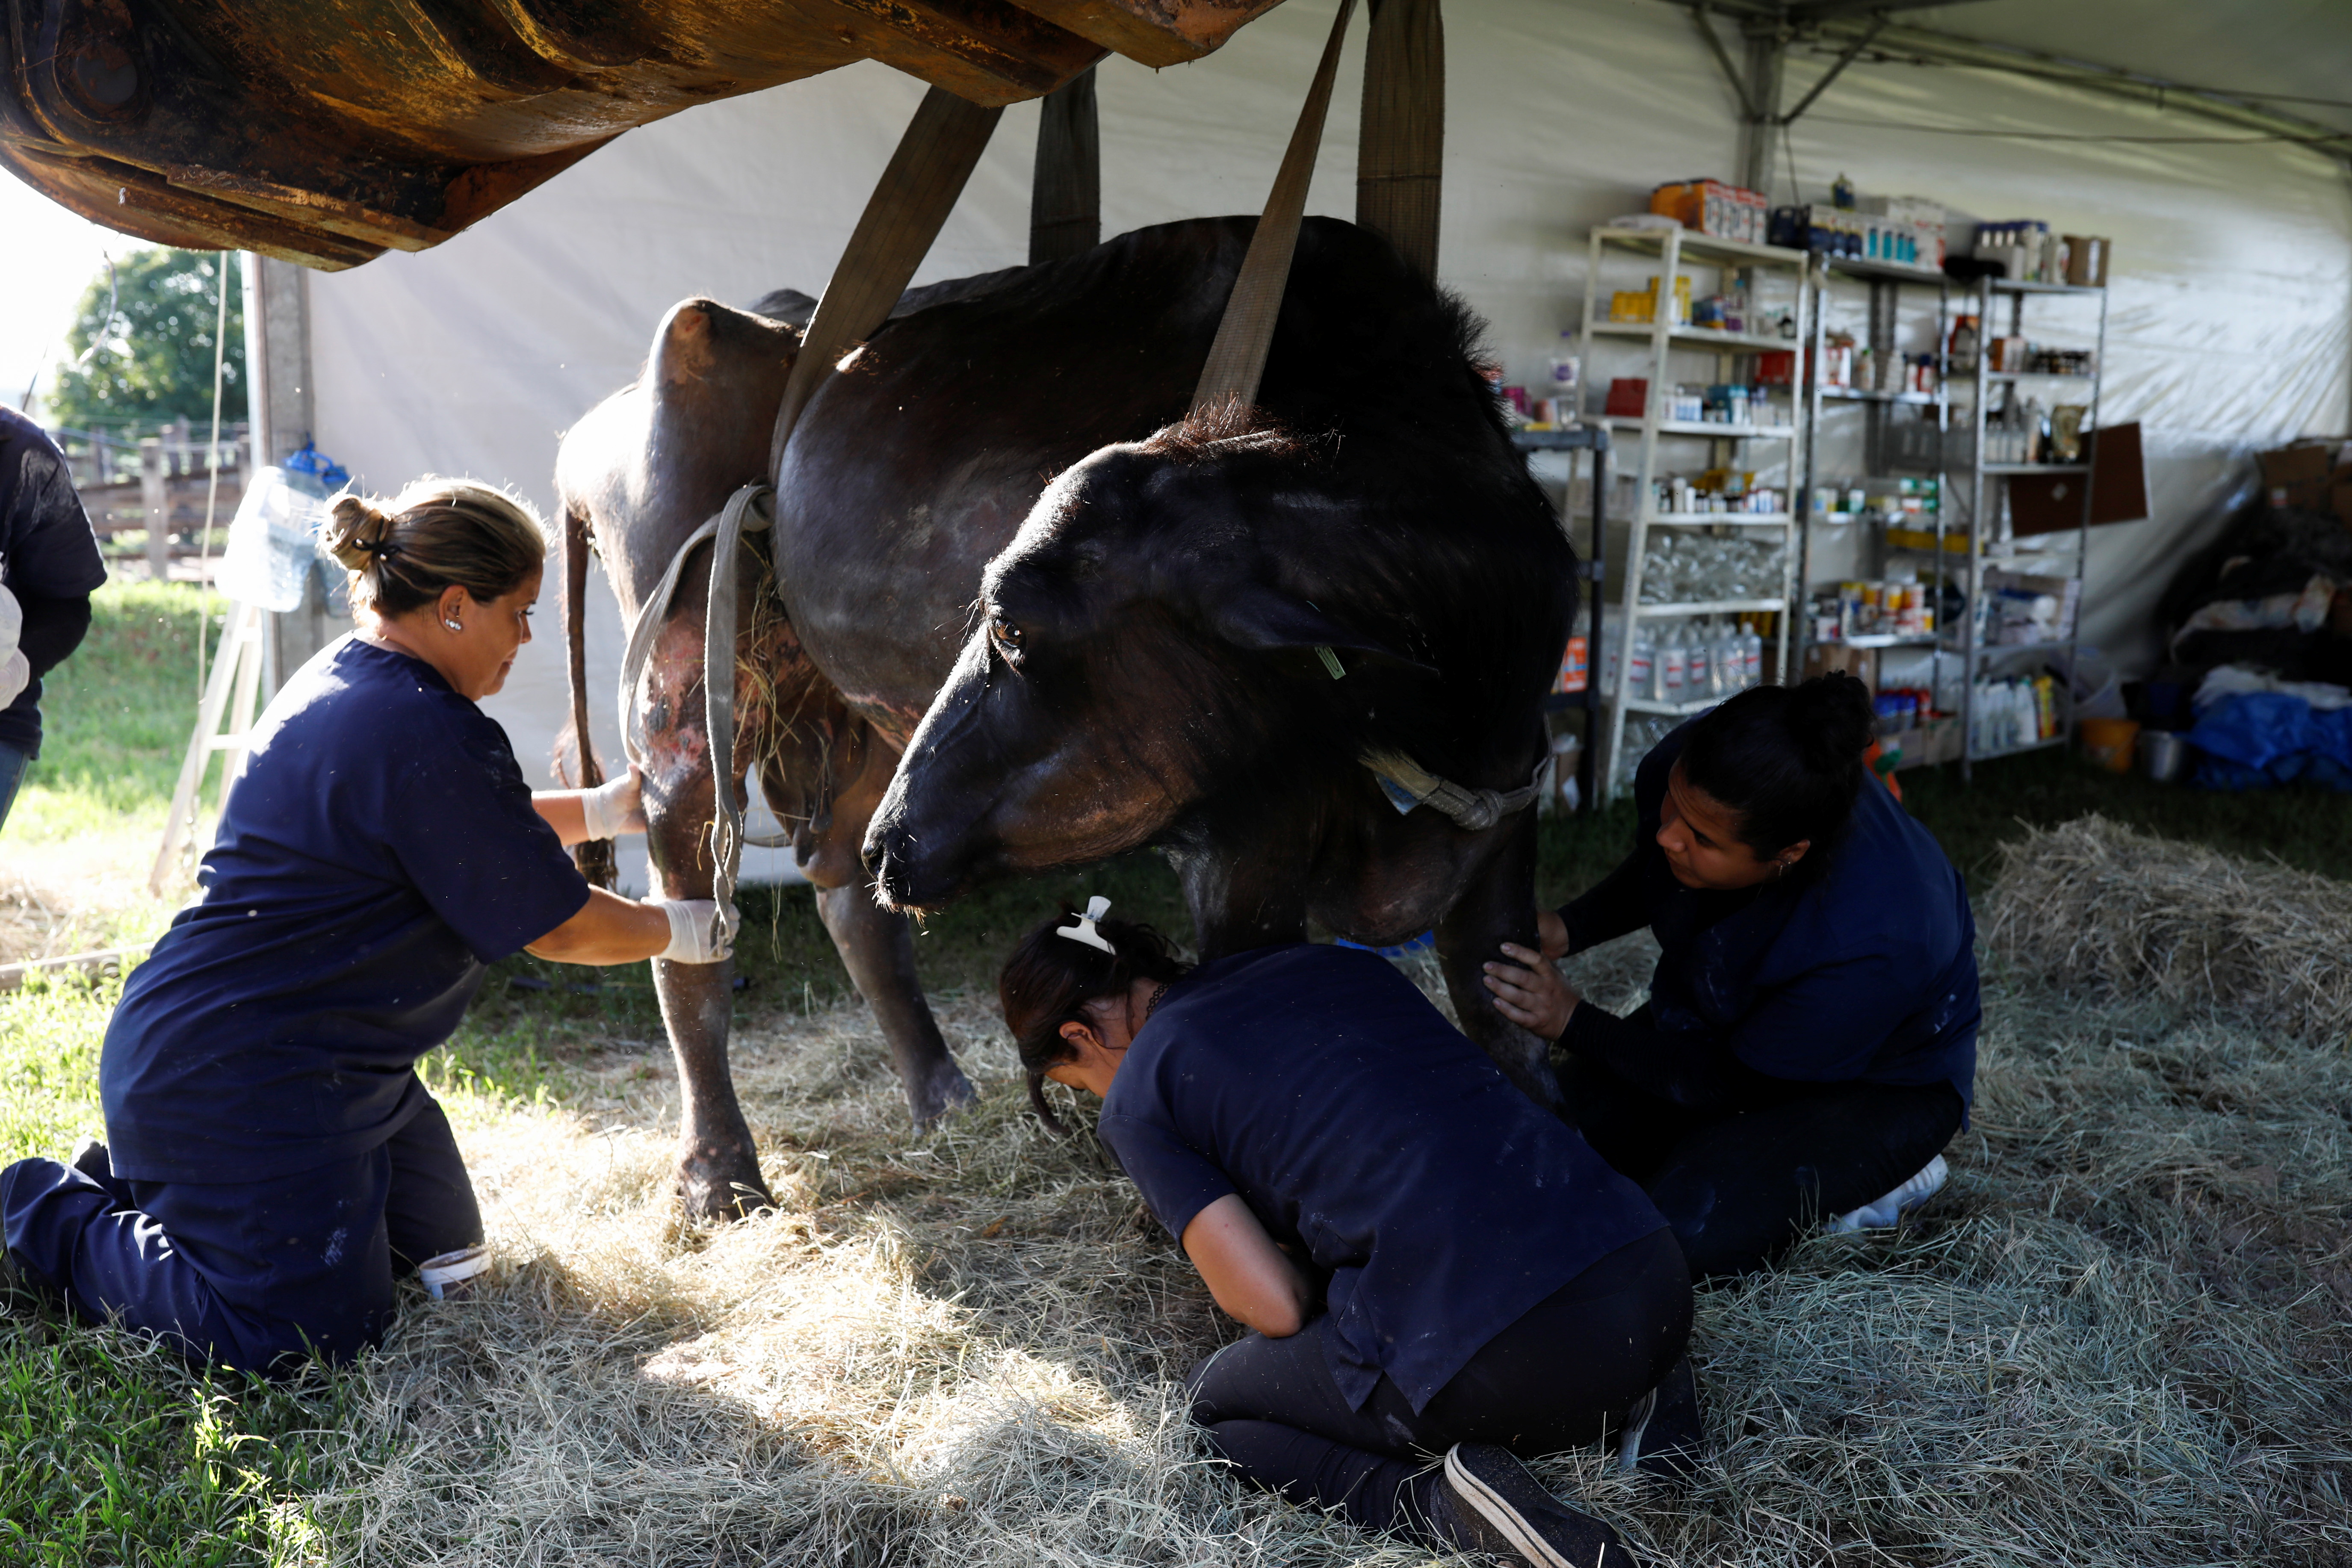 Volunteers treat a malnourished buffalo in a farm where Environmental Police found hundreds of mistreated buffaloes in Brotas, Sao Paulo state, Brazil December 1, 2021.  REUTERS/Amanda Perobelli